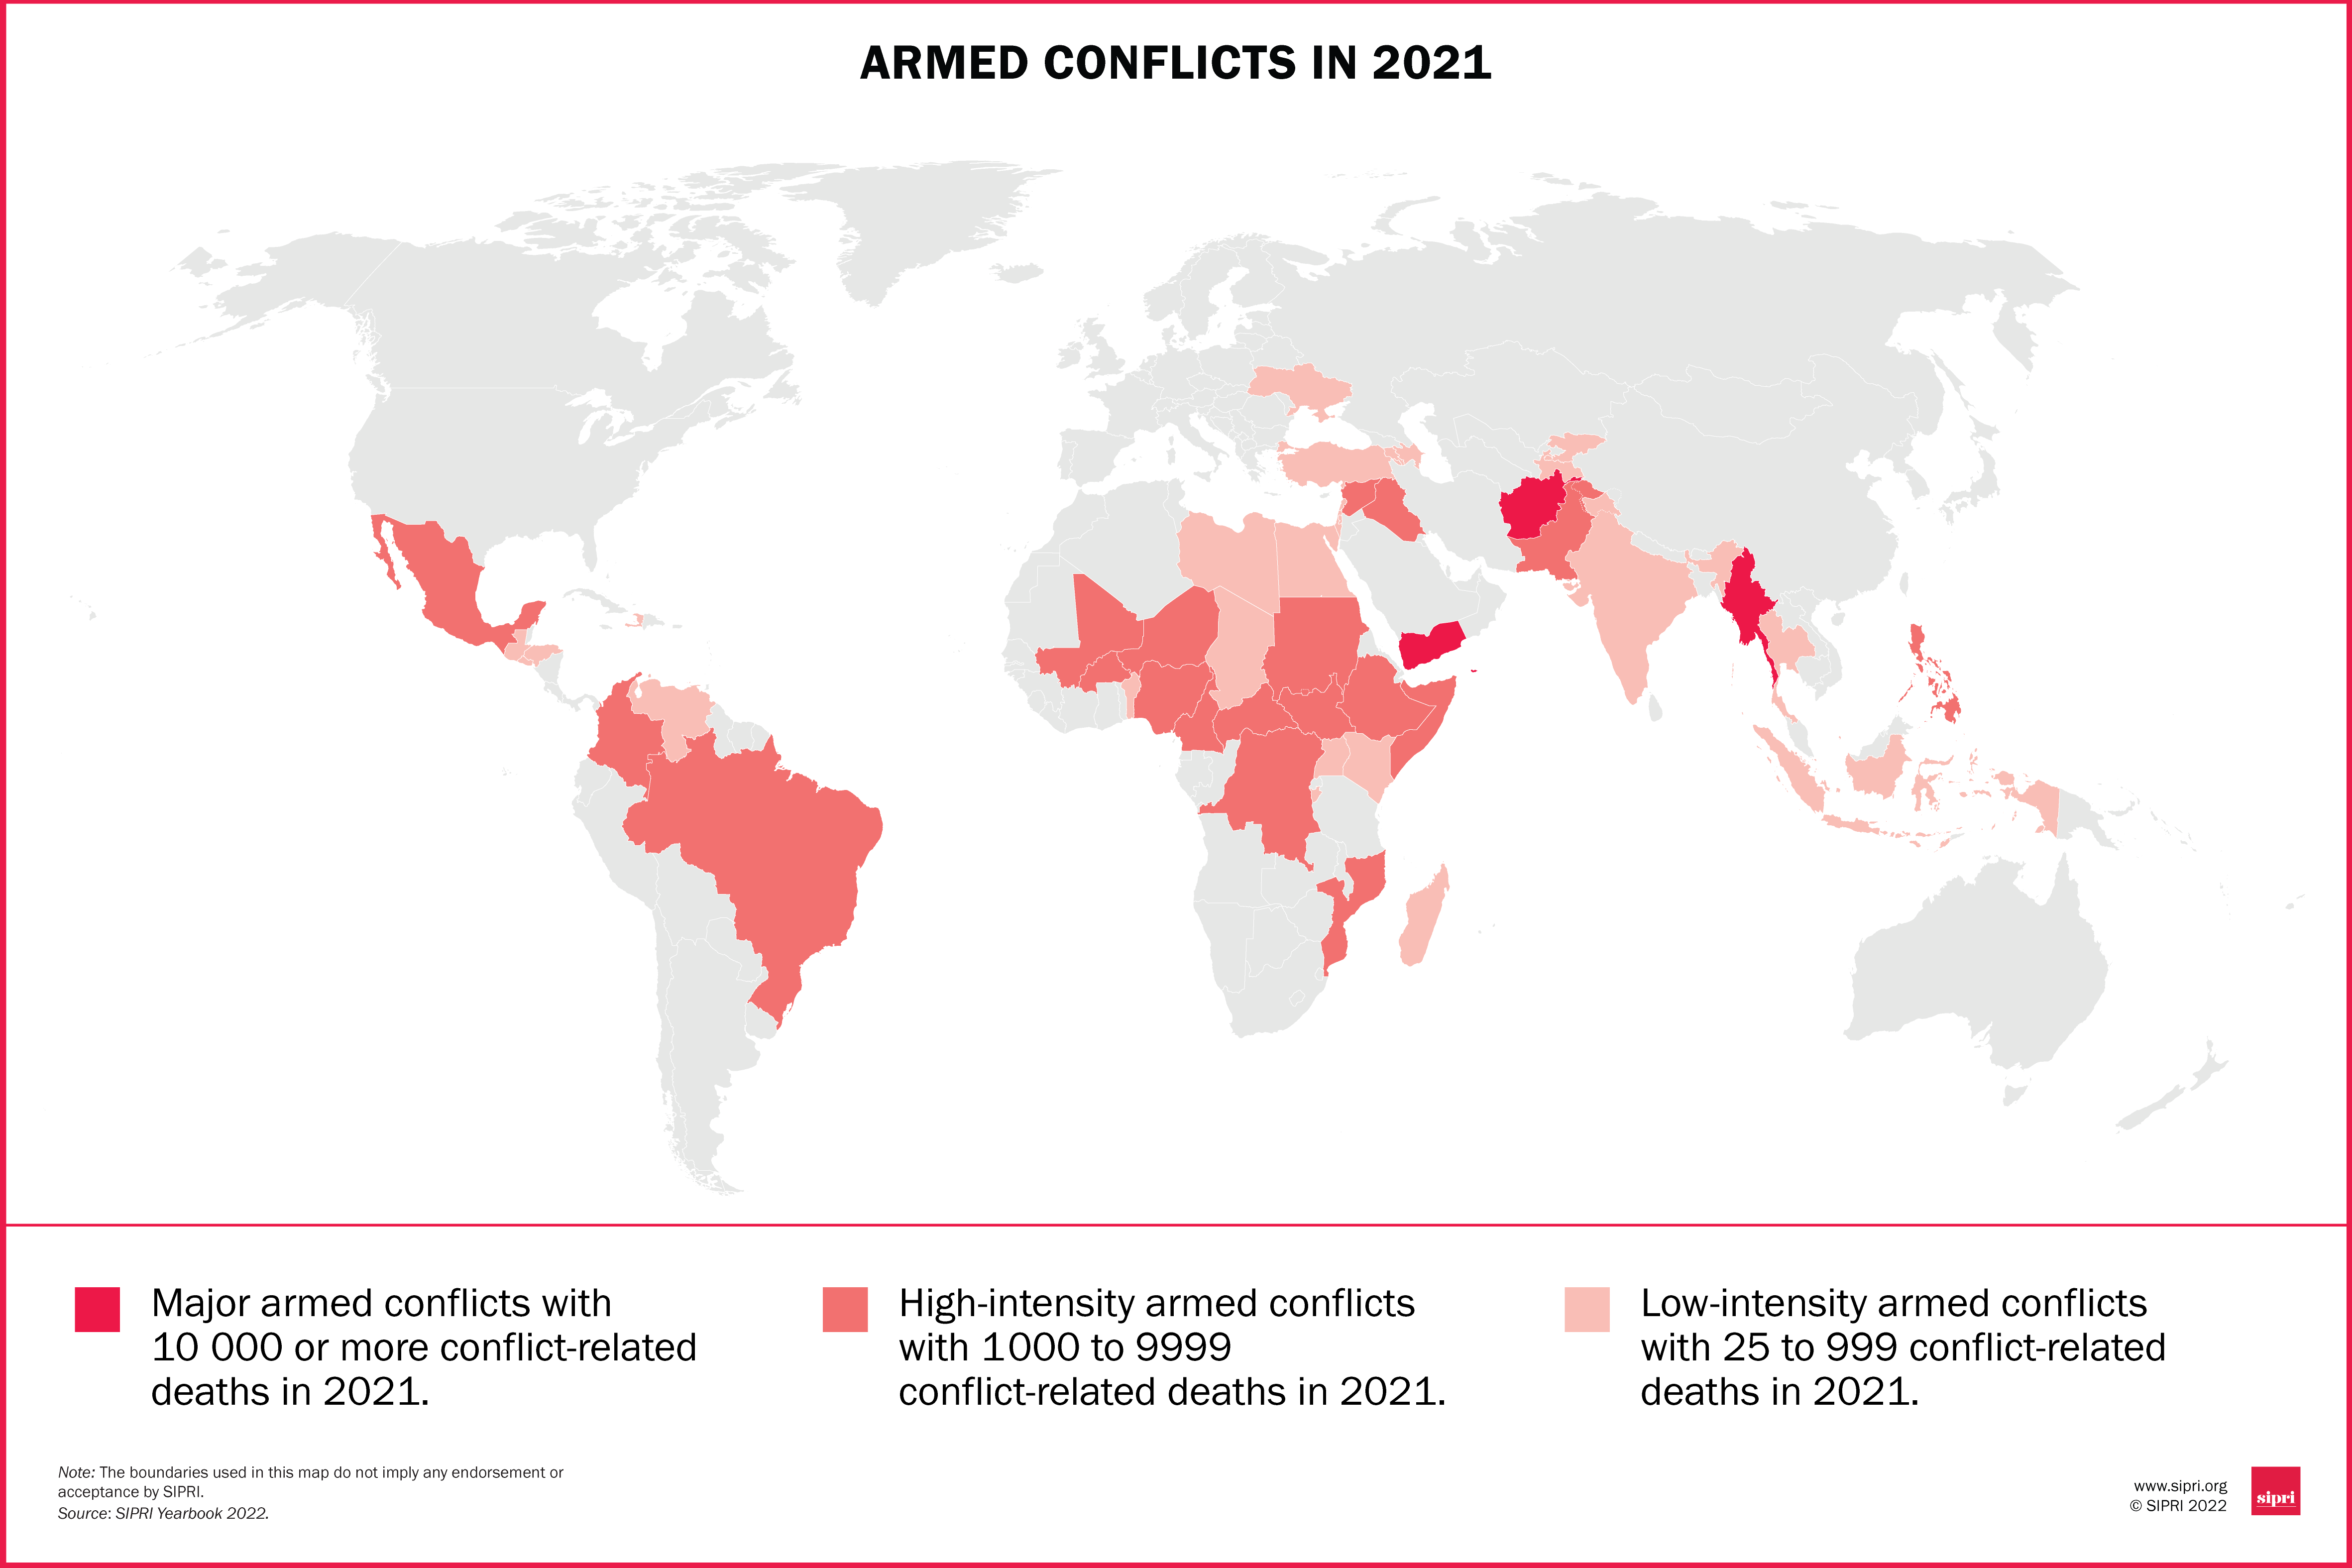 2. Global developments in armed conflicts, peace processes and peace